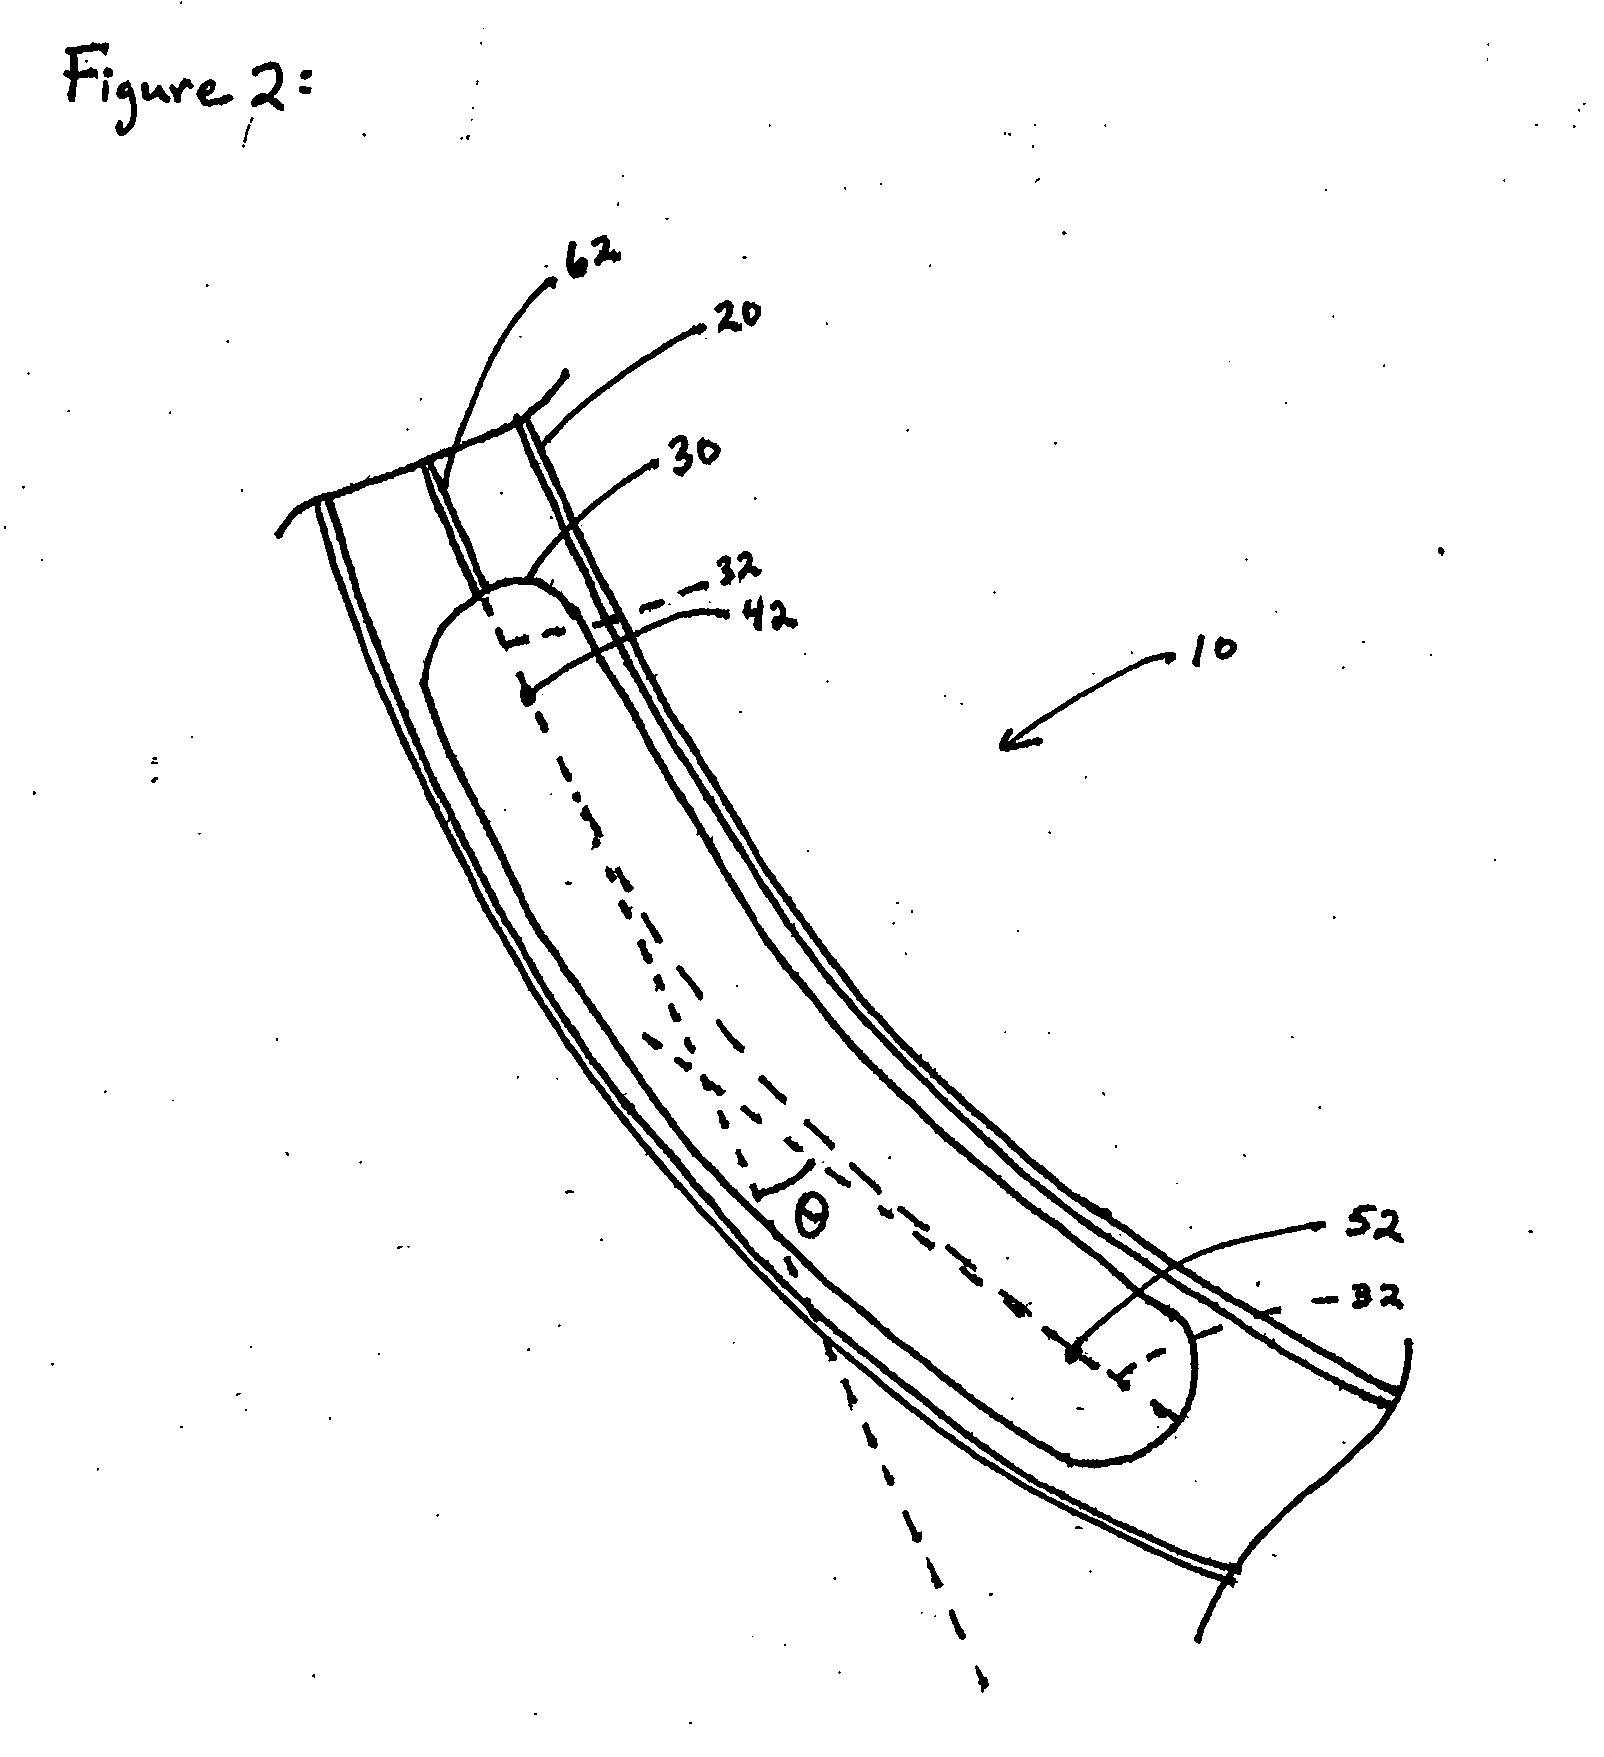 System and method for measurements of depth and velocity of instrumentation within a wellbore